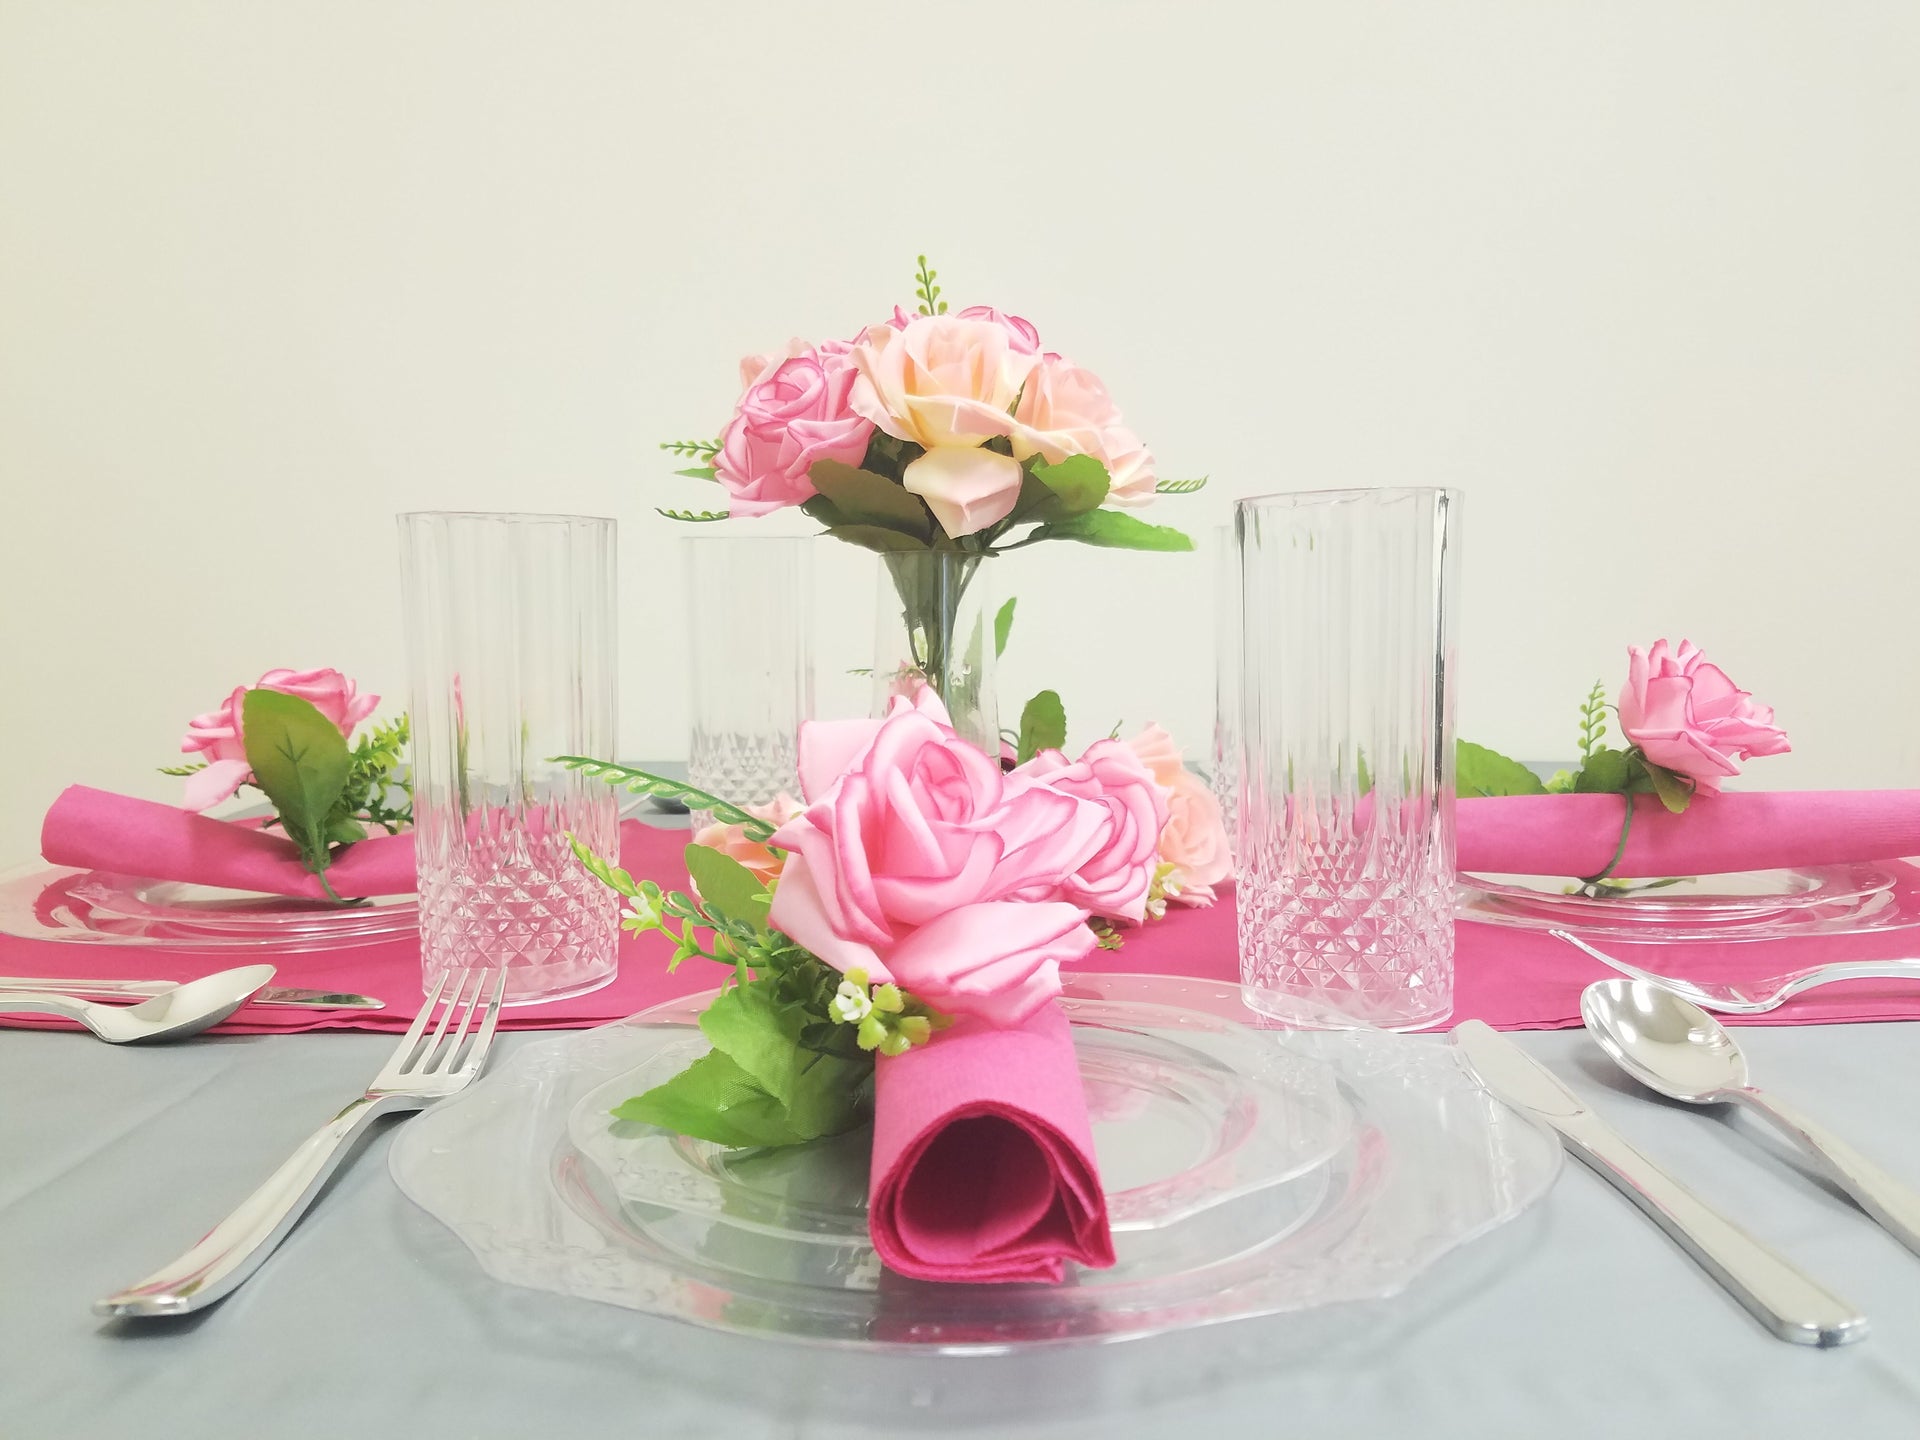 Chic Valentine's Day Table Setting Ideas